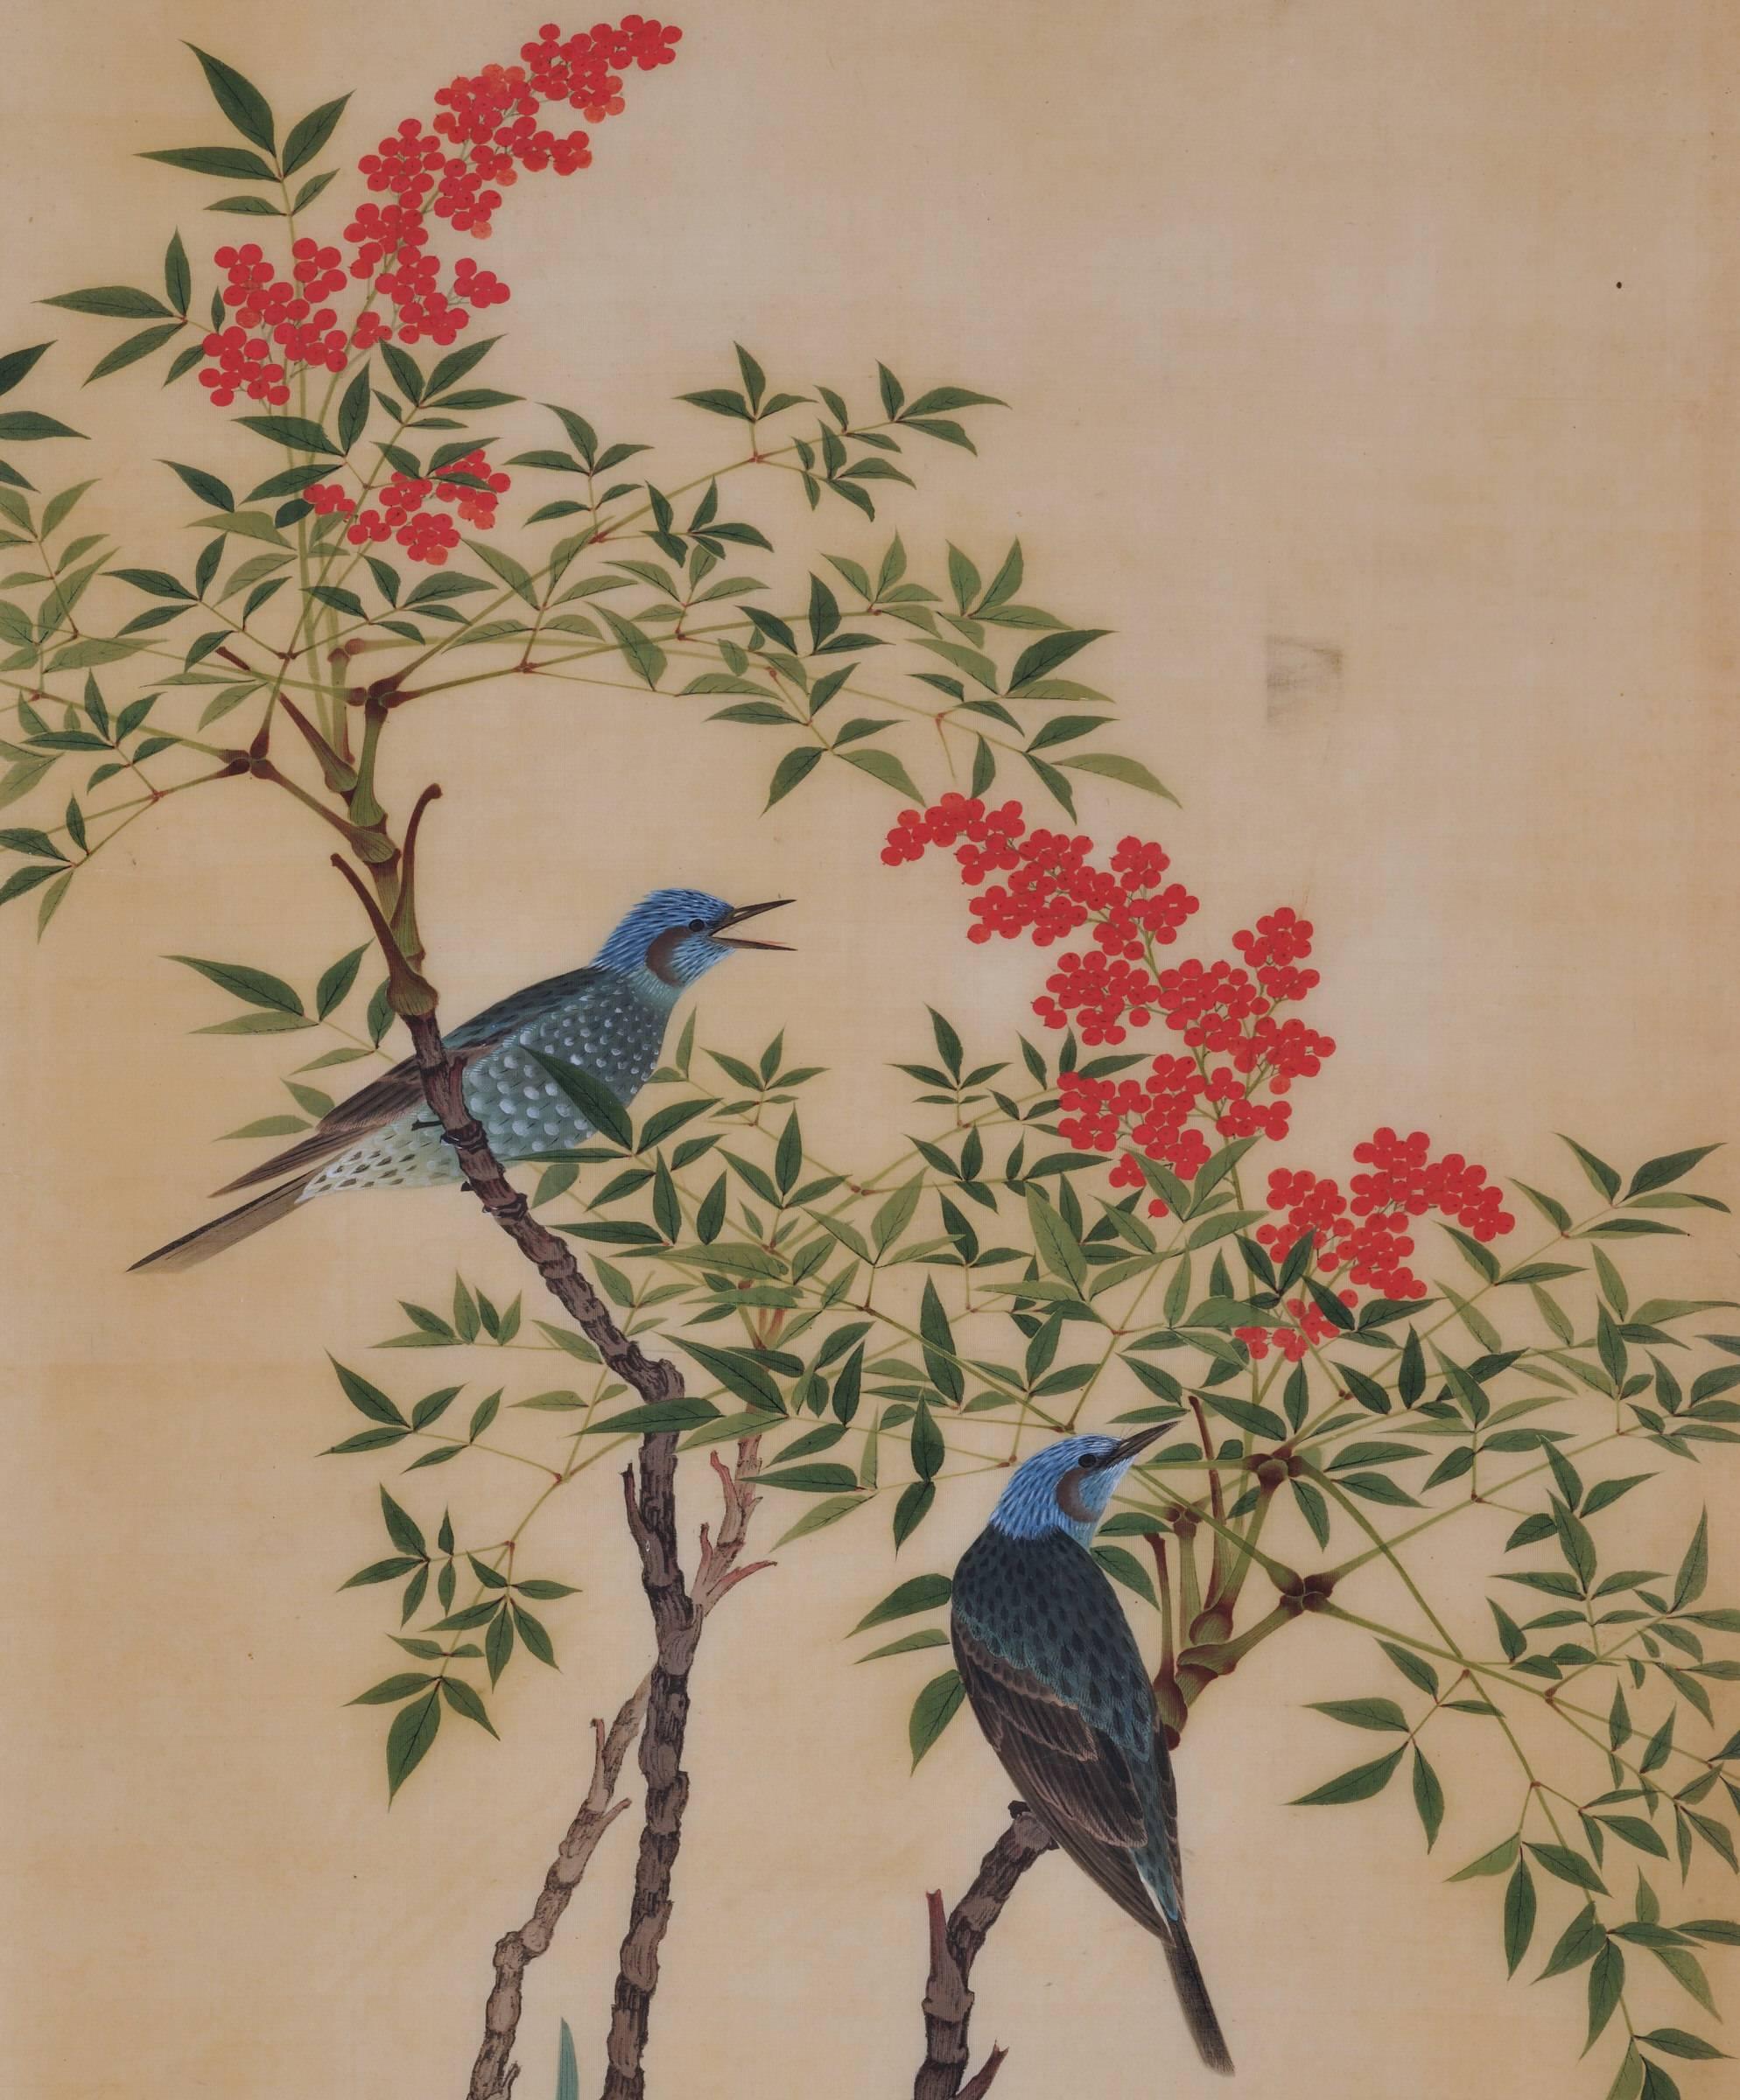 Takakura Zaiko (fl.1854-1860)

Birds and flowers of the seasons

Pheasants and Peonies

Ink and color on silk

Unframed

Seal: Taka Zaiko no in 

Dimensions:

H 39” x W 16.5” (100 cm x 42.5 cm)

Bird and flower paintings by the